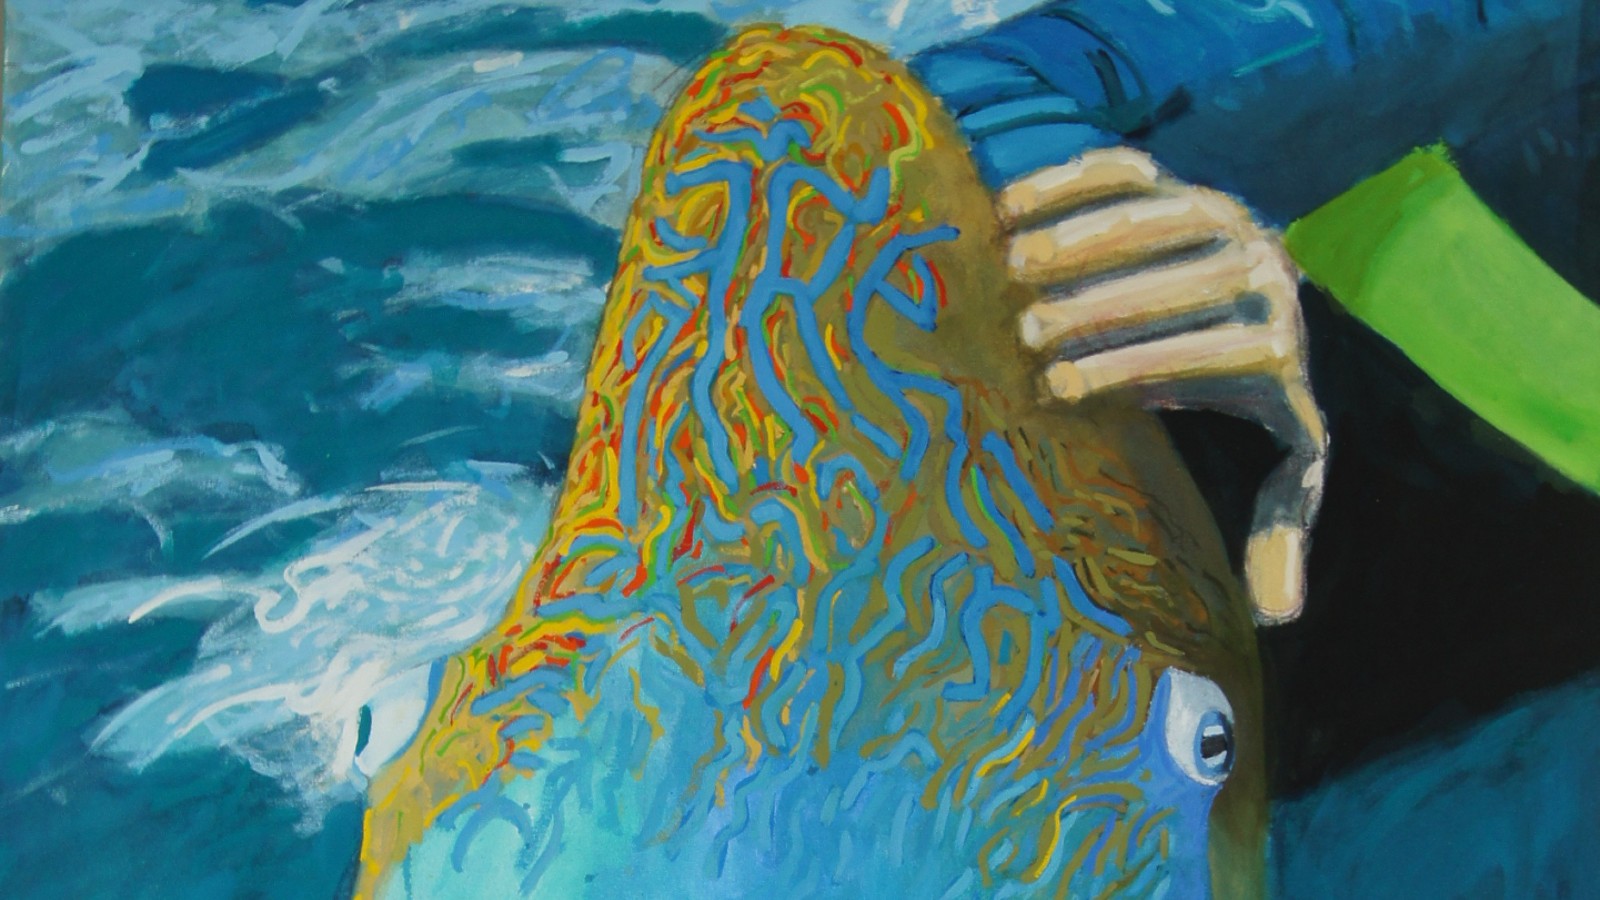 Image Artwork by David Whitfield titled Pat the fish. Detail.